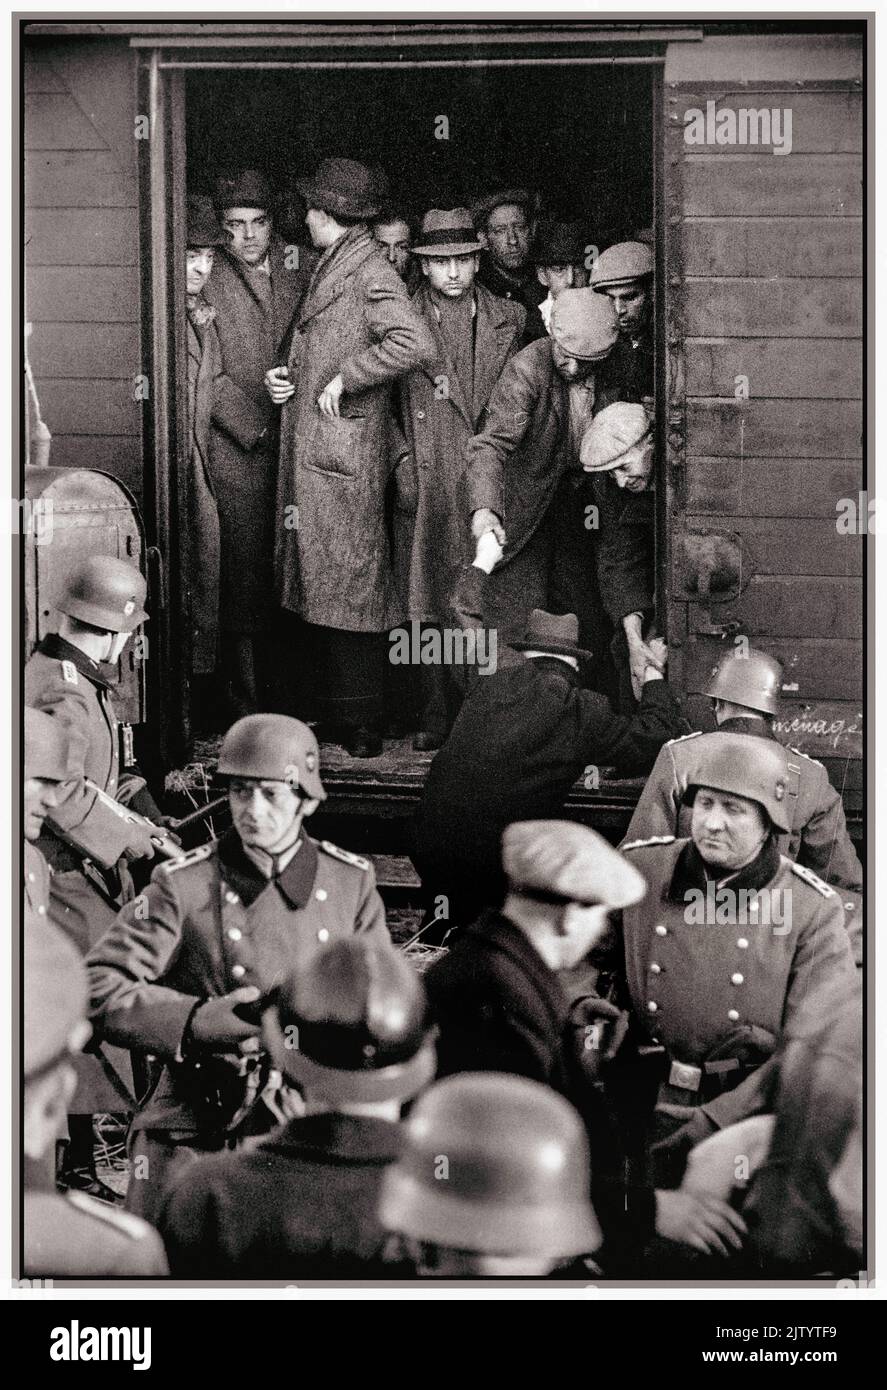 WW2 1943 Deportation of Jewish men from Marseilles Old Port Gare d'Arenc Vichy France. Under the collaboration of Vichy & Nazi regime of  occupied France, assisted by the Vichy French Police. Ordered directly by Himmler. Südfrankreich, Marseille, Güterbahnhof Gare d'Arenc.- Deportation von Juden unter Bewachung des SS-Polizeiregiments Griese und französischer Polizei. Vichy France Stock Photo